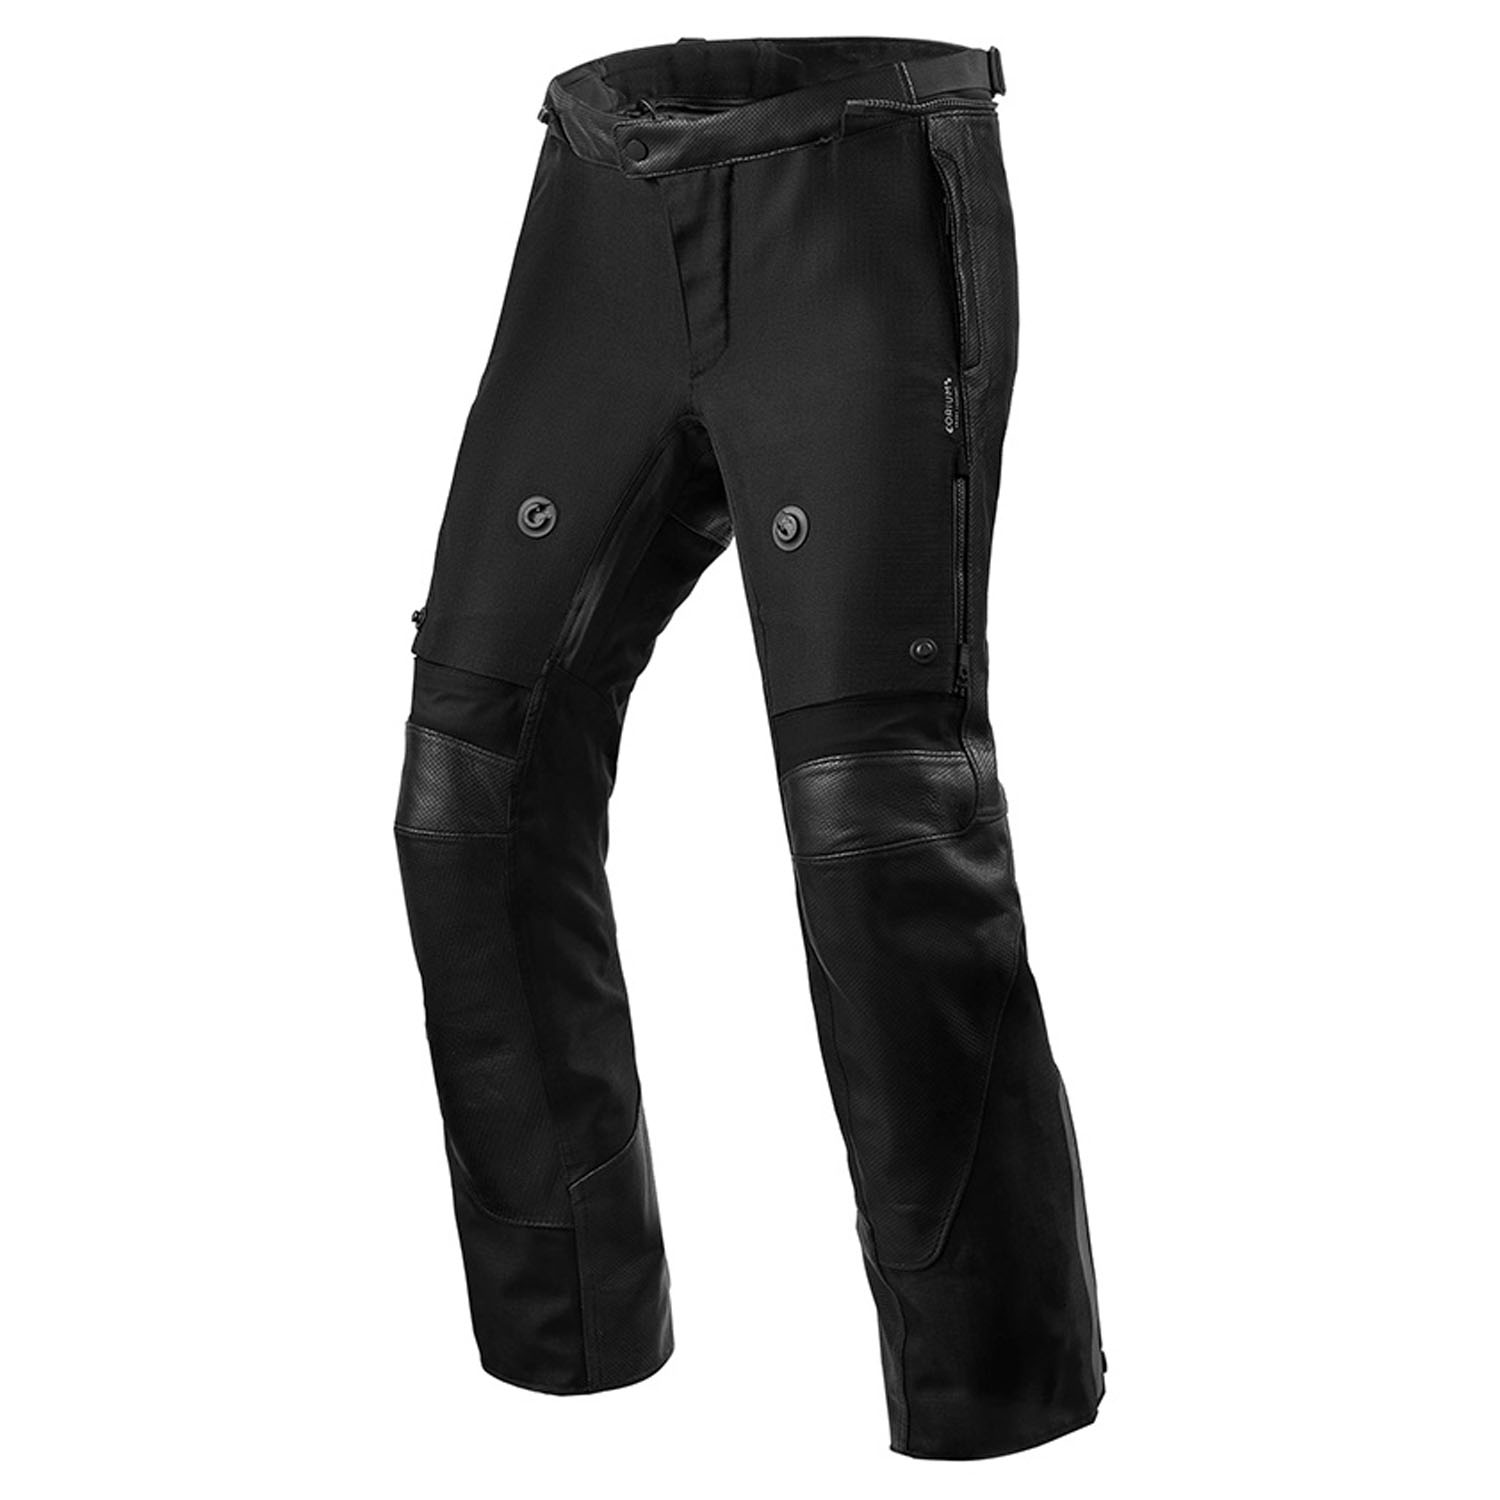 Image of REV'IT! Trousers Valve H2O Black Short Motorcycle Pants Size 54 ID 8700001315876